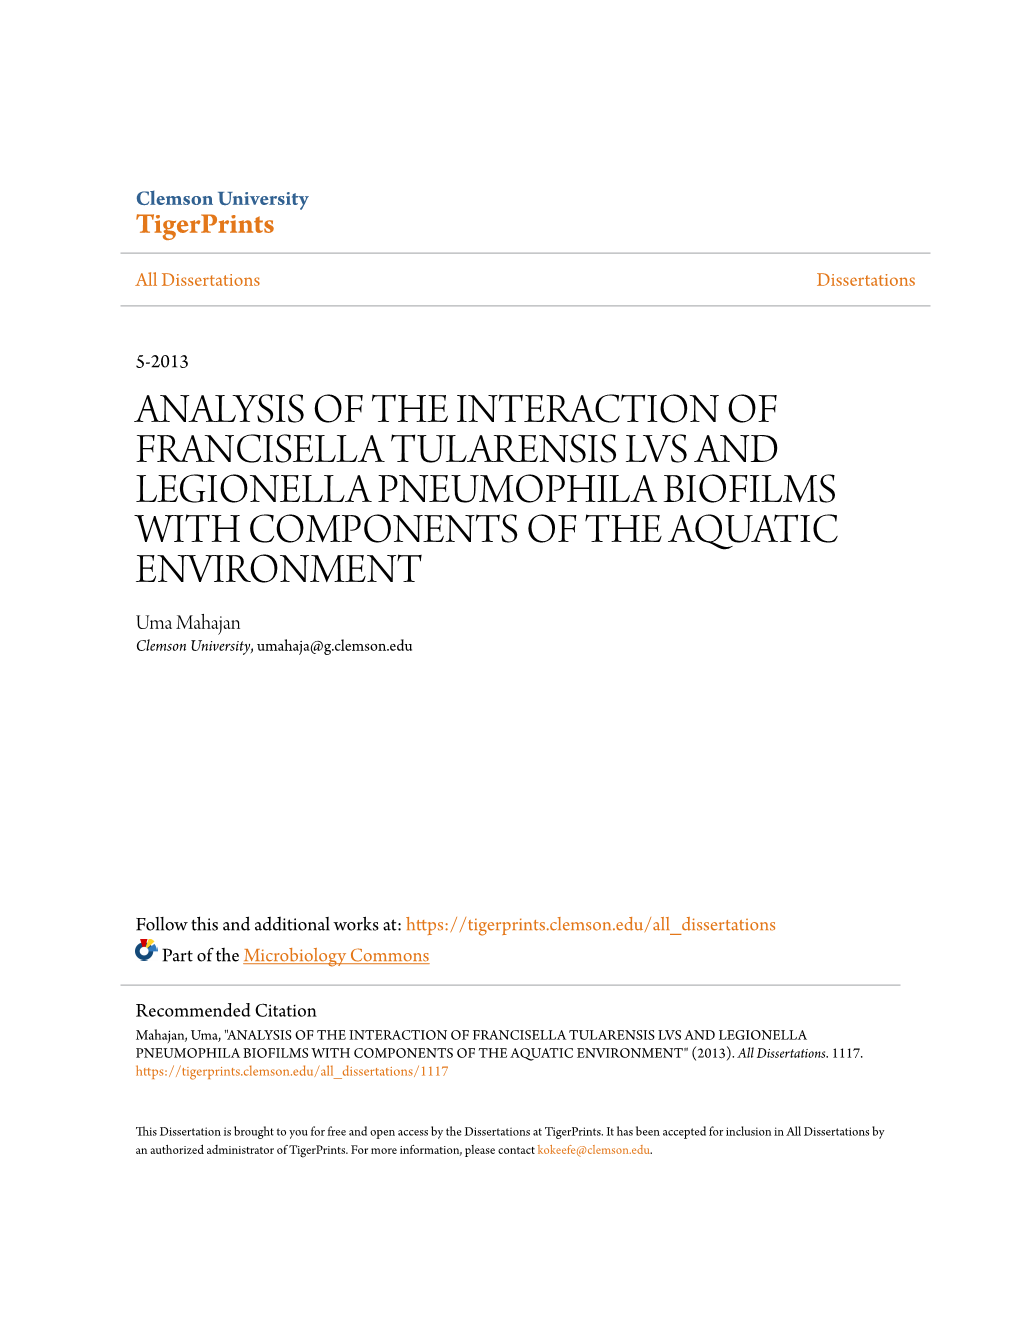 Analysis of the Interaction of Francisella Tularensis Lvs